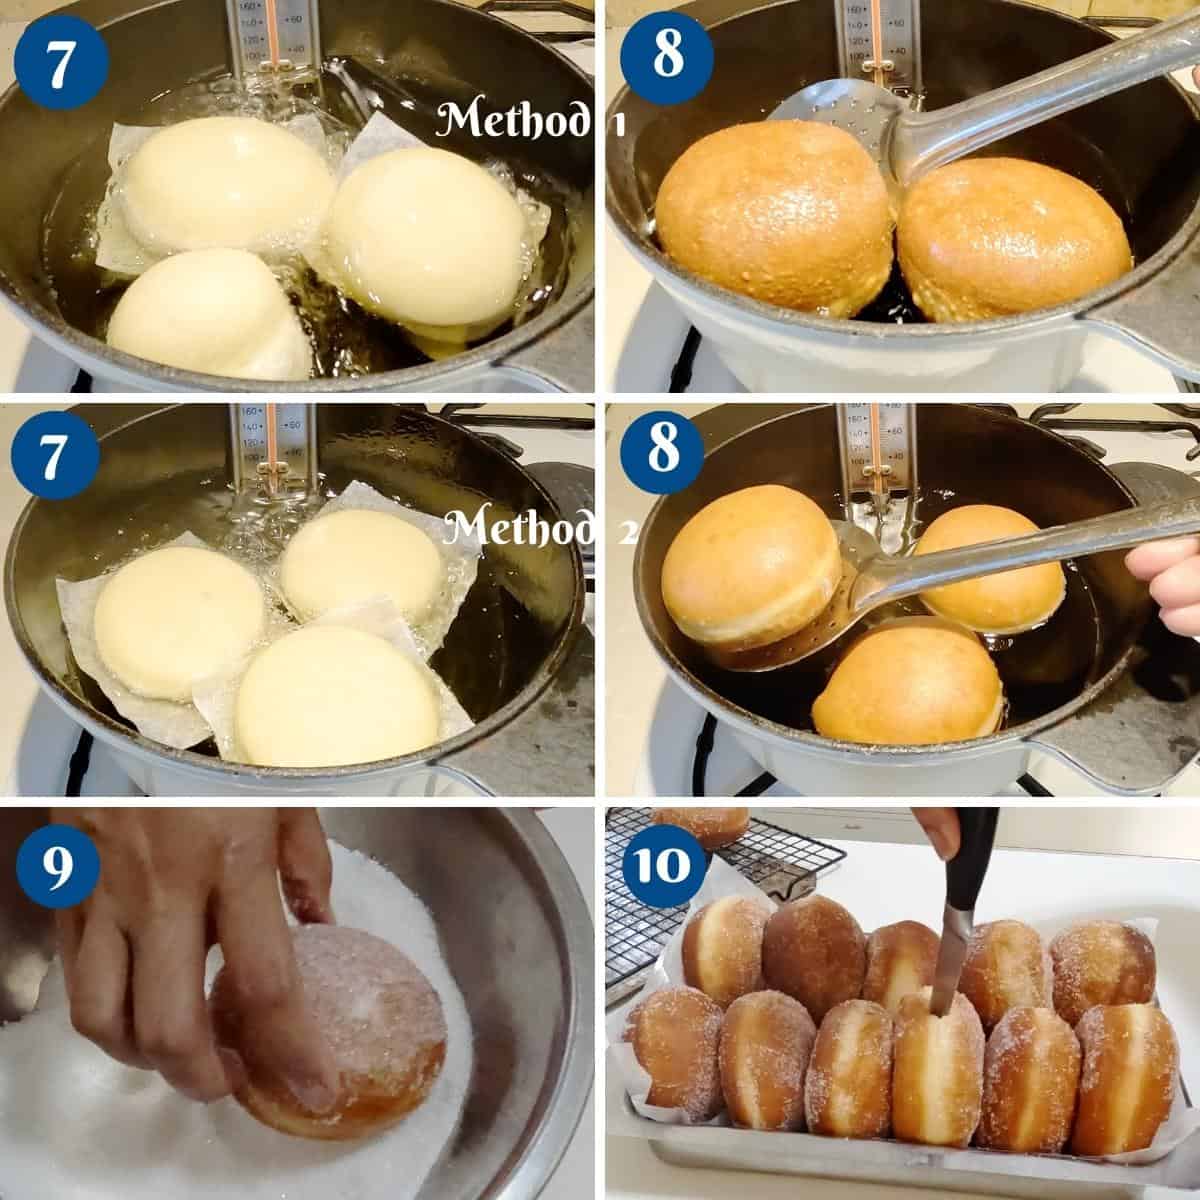 Progress pictures deep fried donuts.